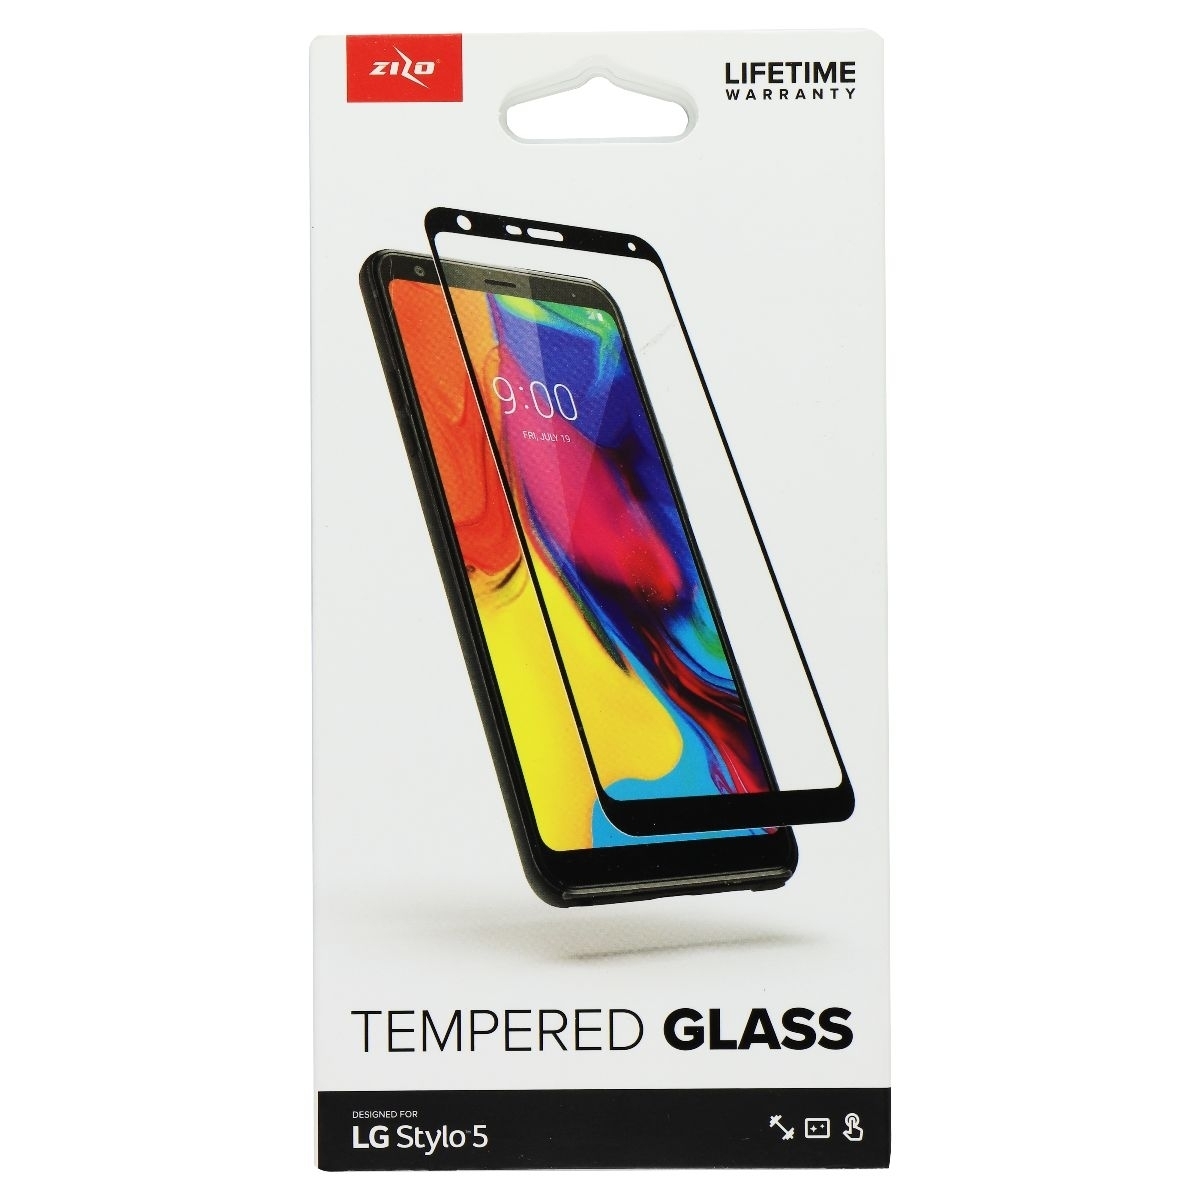 Zizo 9H Tempered Glass Screen Protector For LG Stylo 5 - Clear (Refurbished)